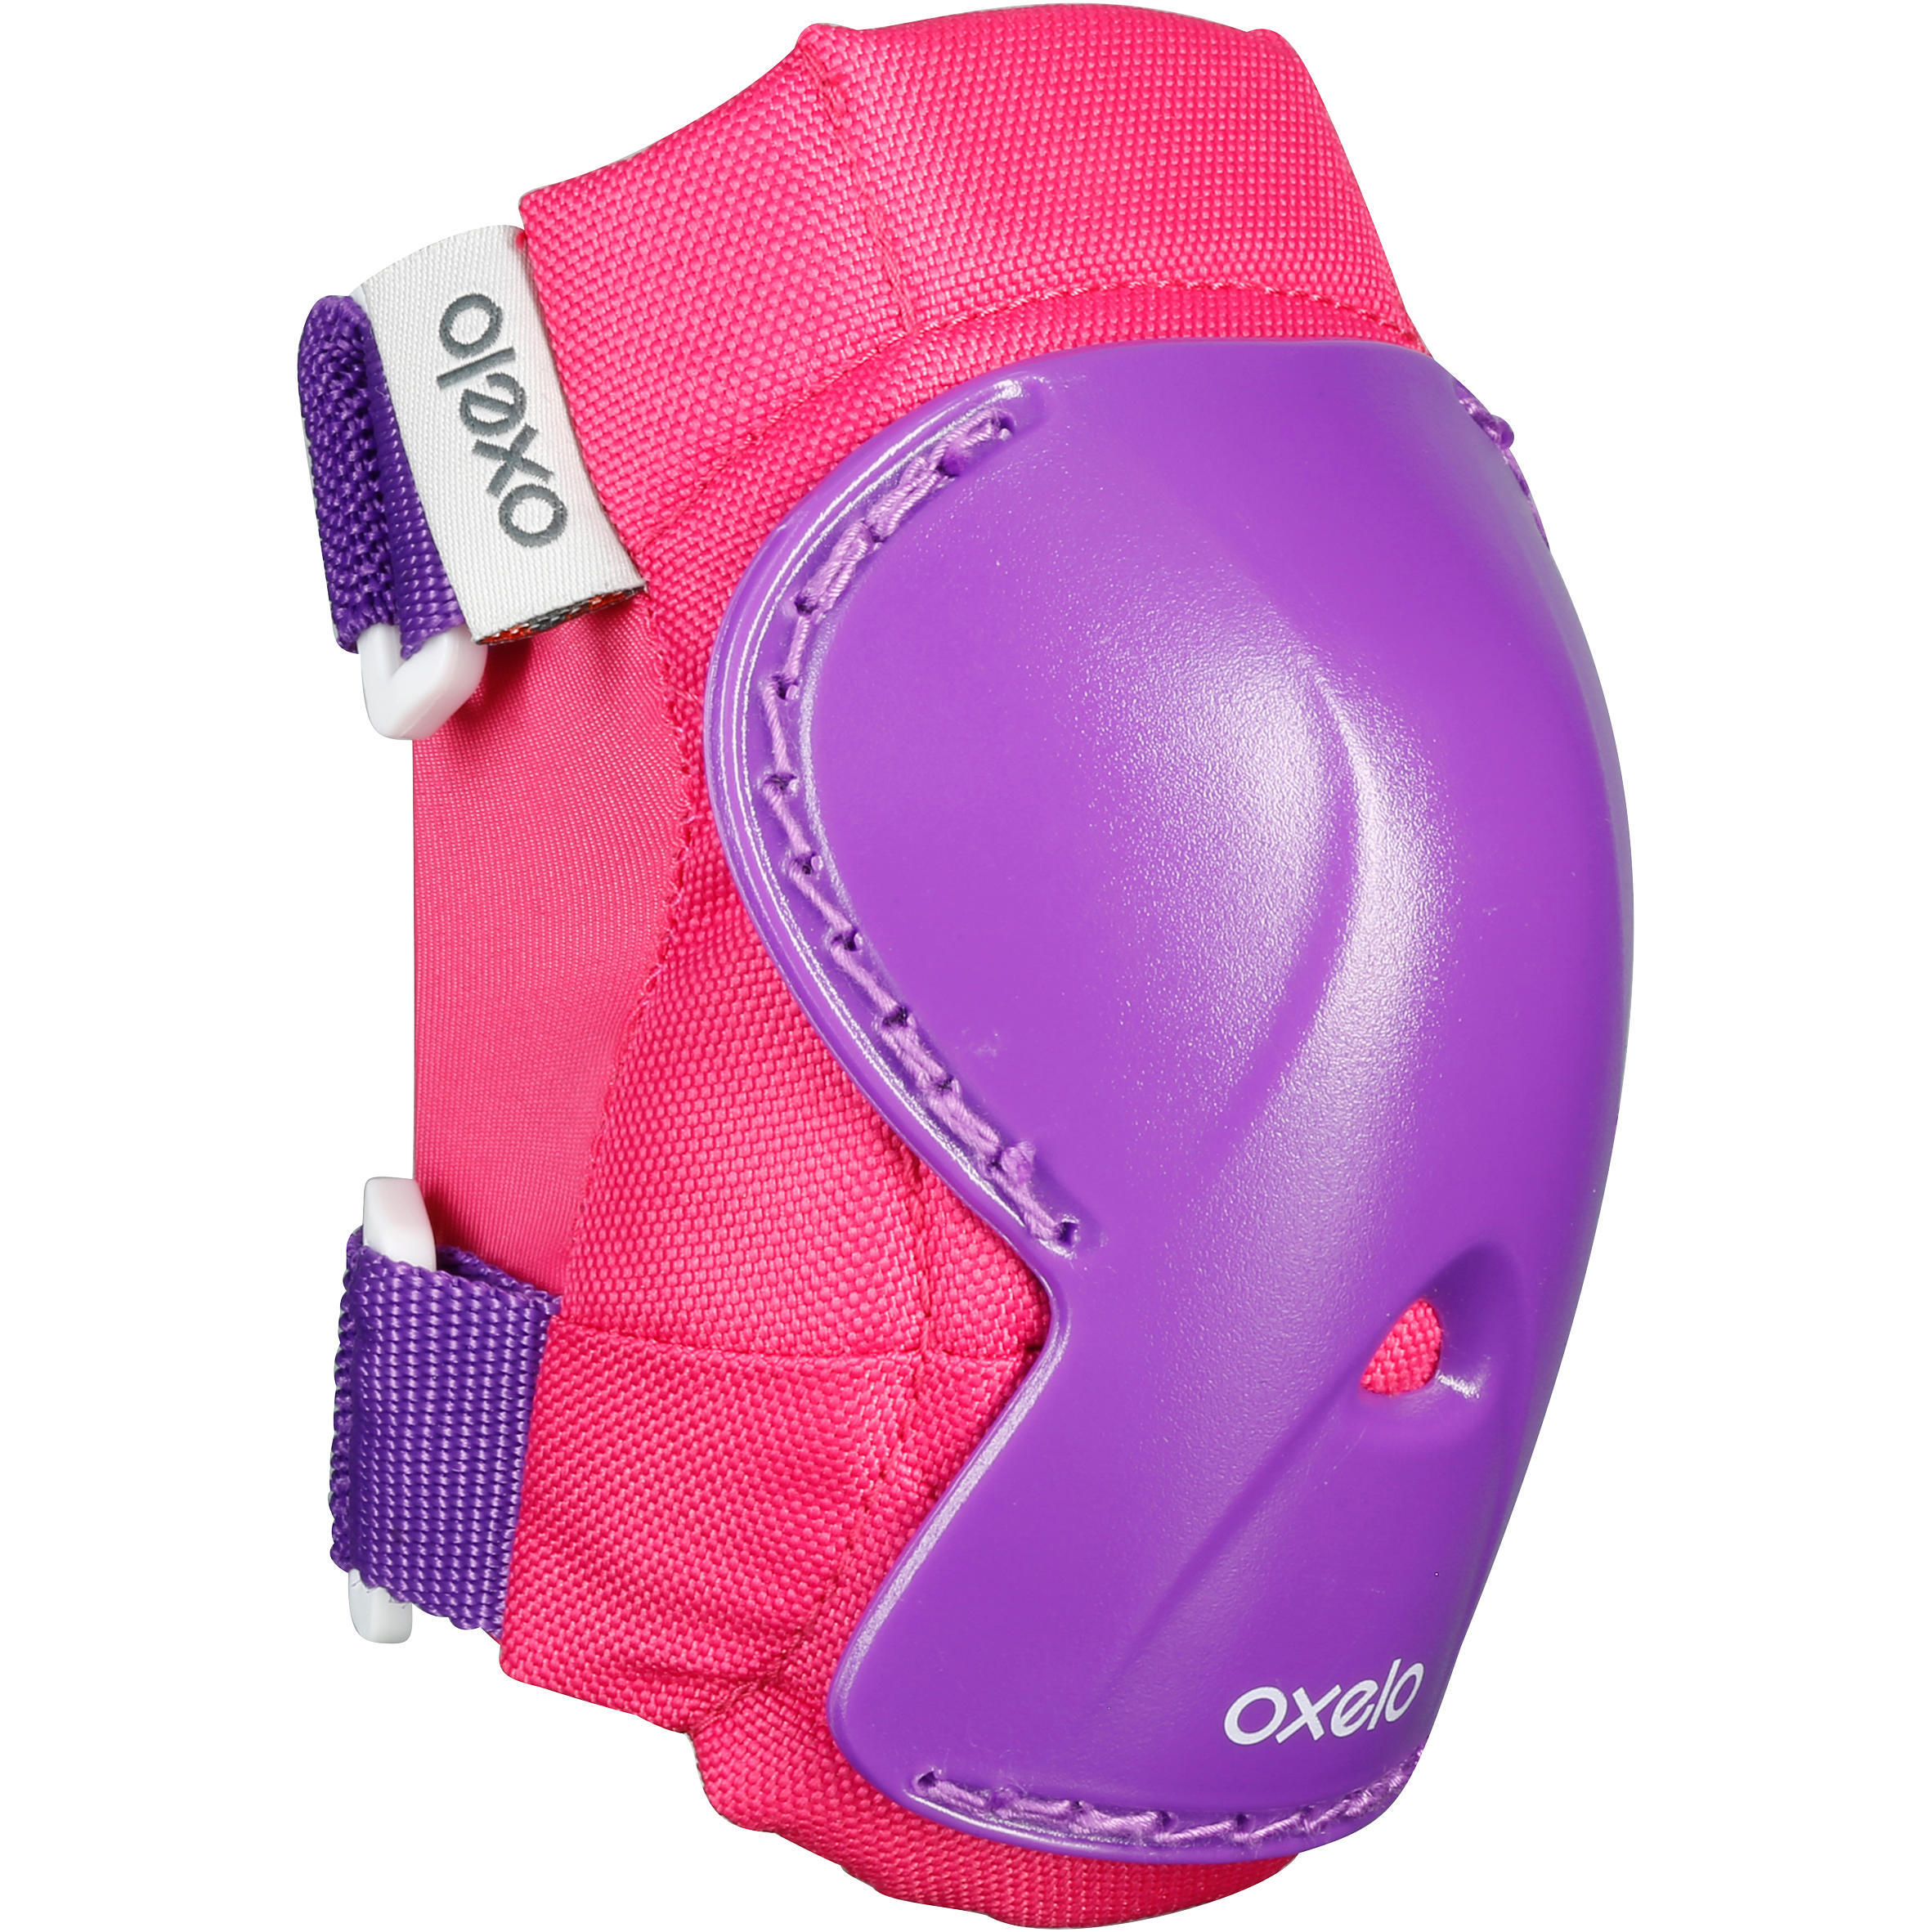 Kids' 2 x 3-Piece Inline Skating Scooter Skateboard Protective Gear Play - Pink 3/13